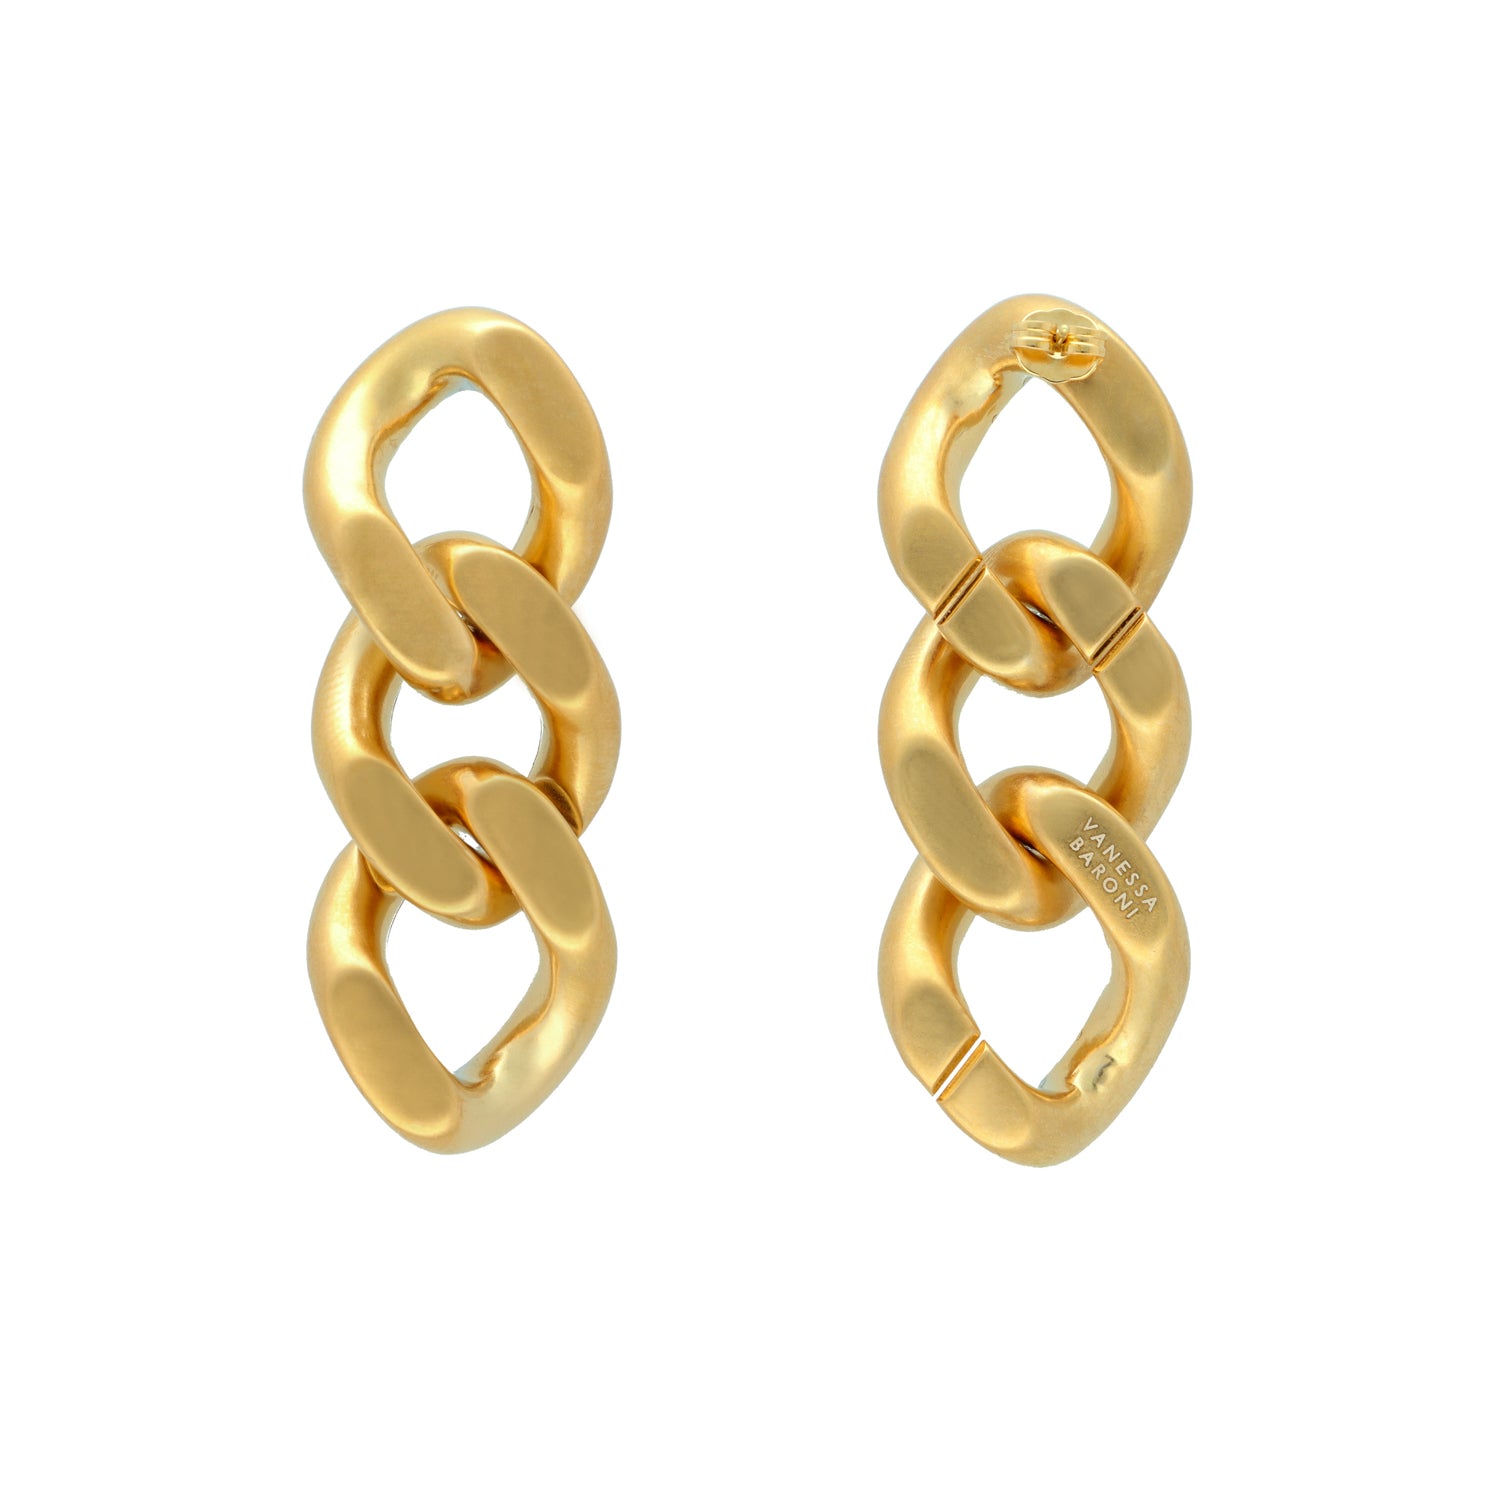 New Flat Chain Earring Gold Vintage